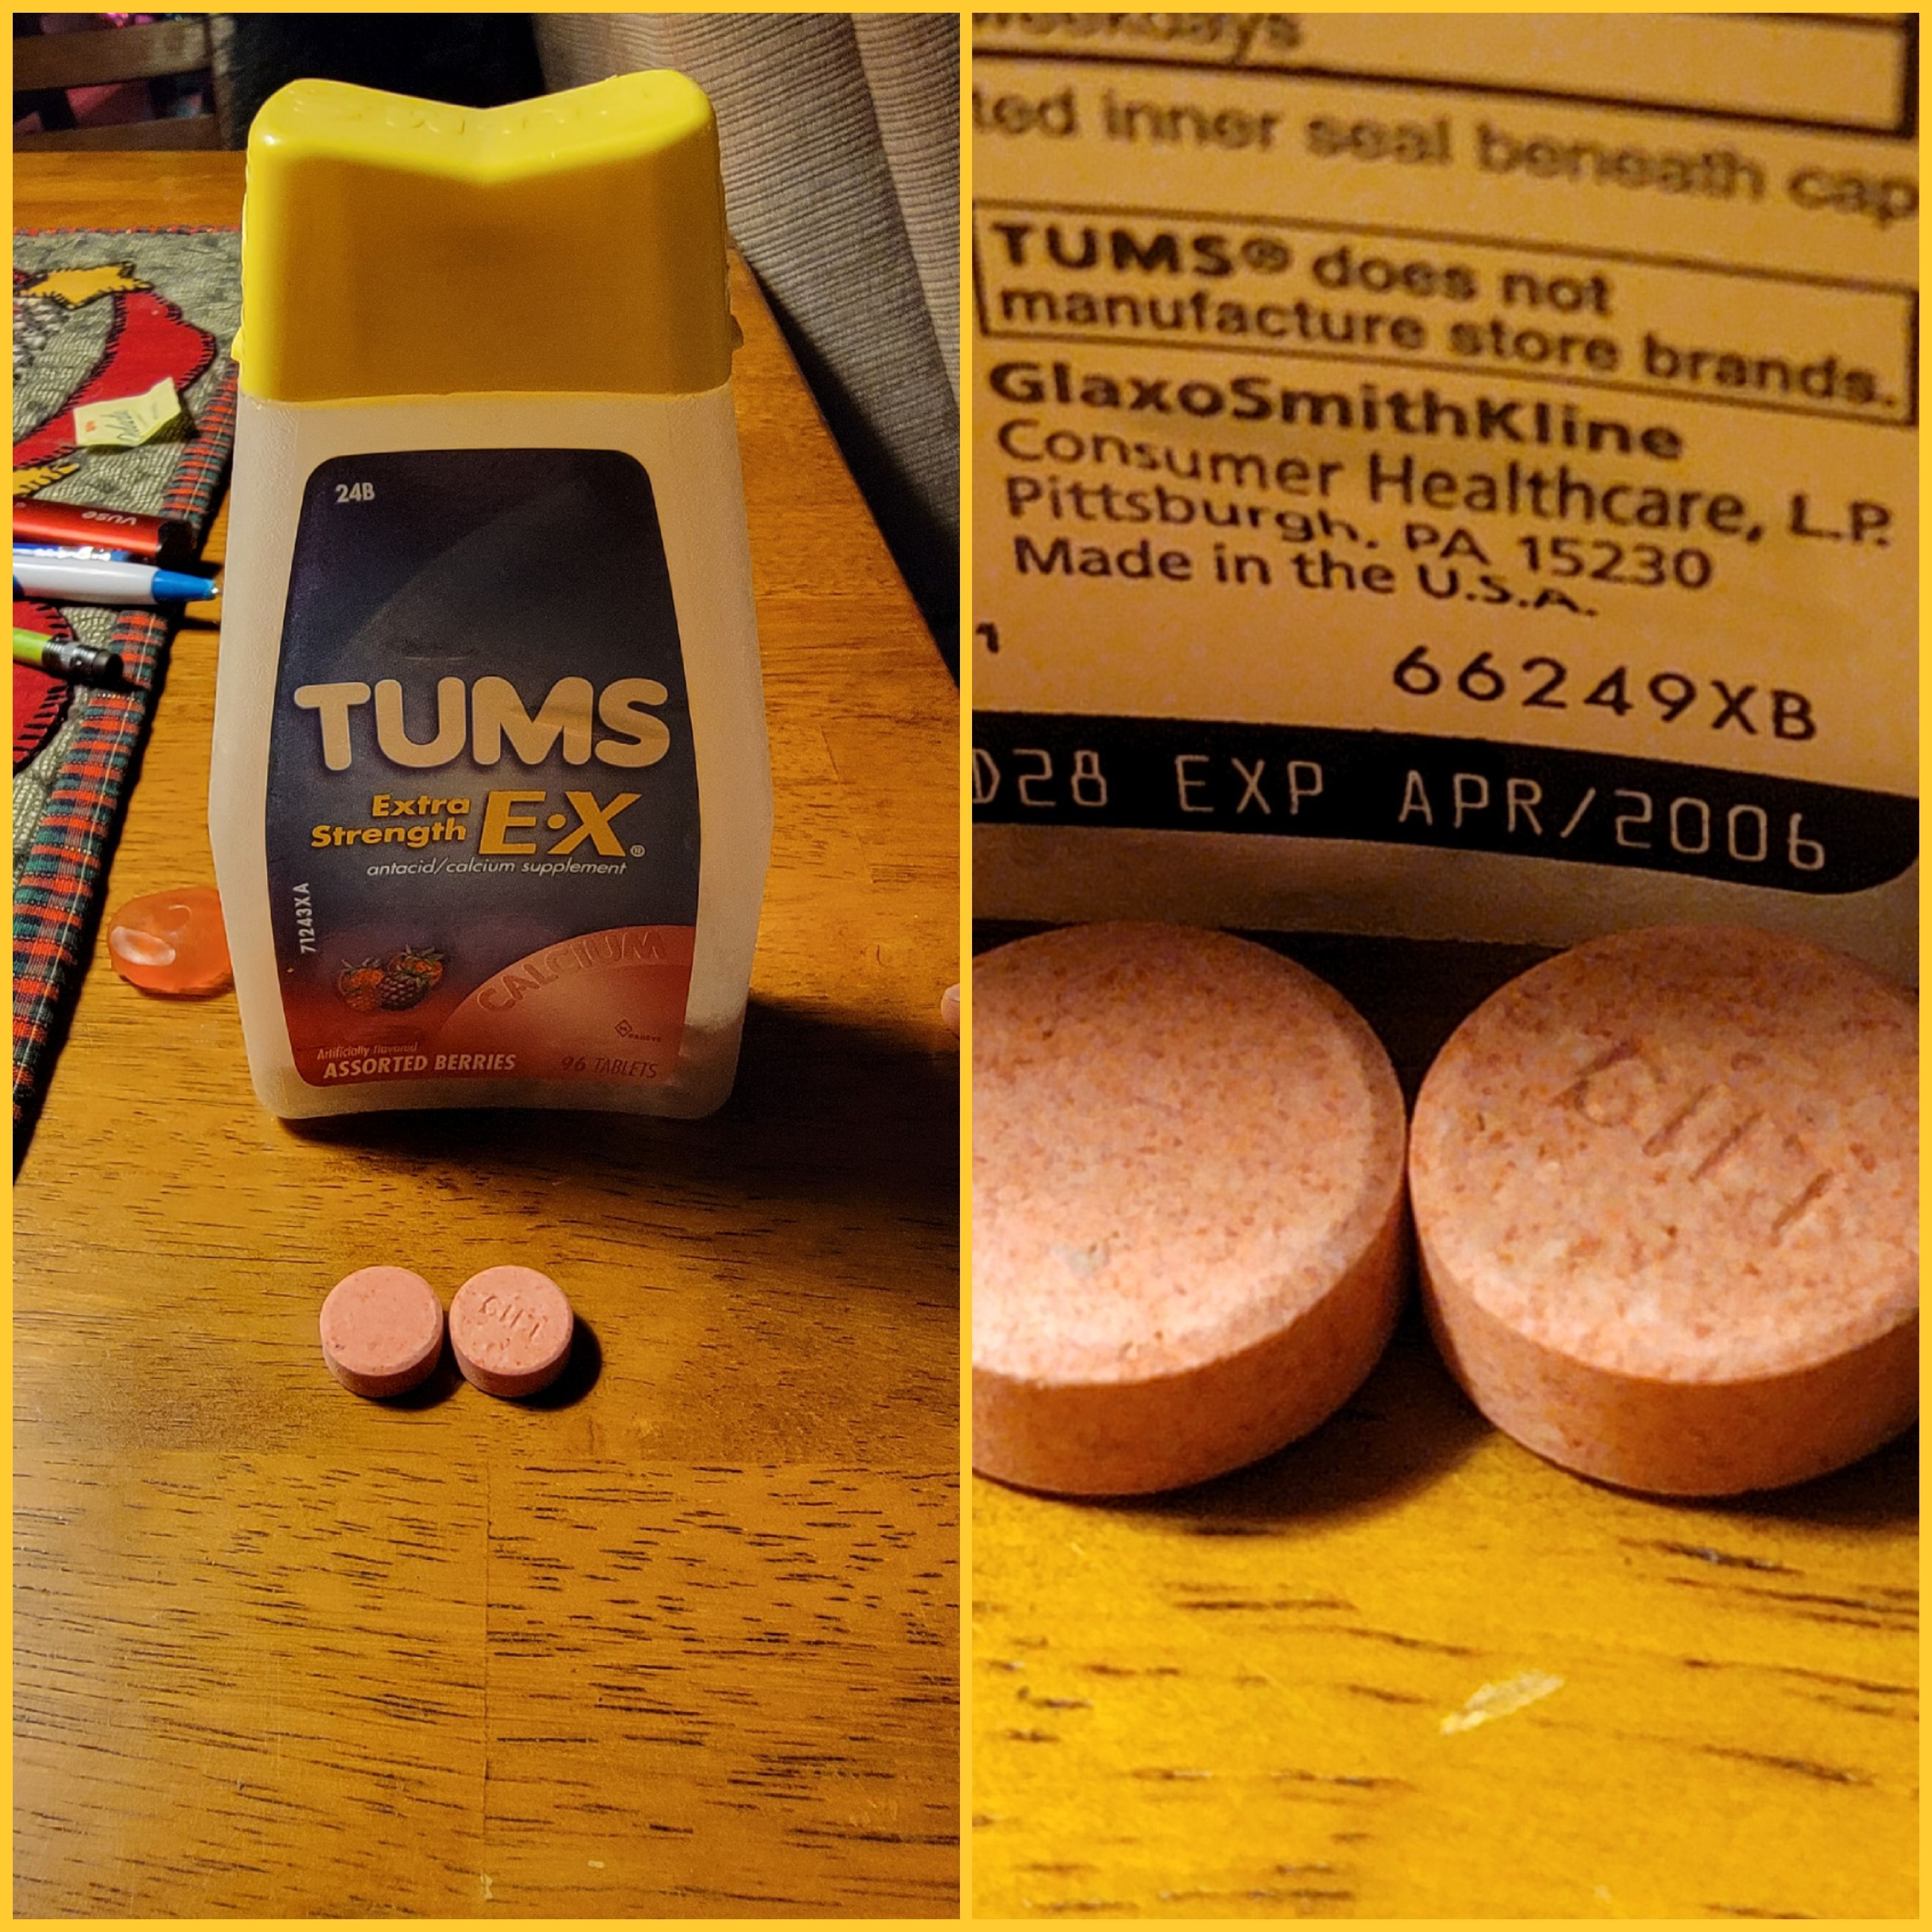 Went to see the fam for Xmas and had heartburn. "There's some Tums in the medicine cabinet." The ***?!?